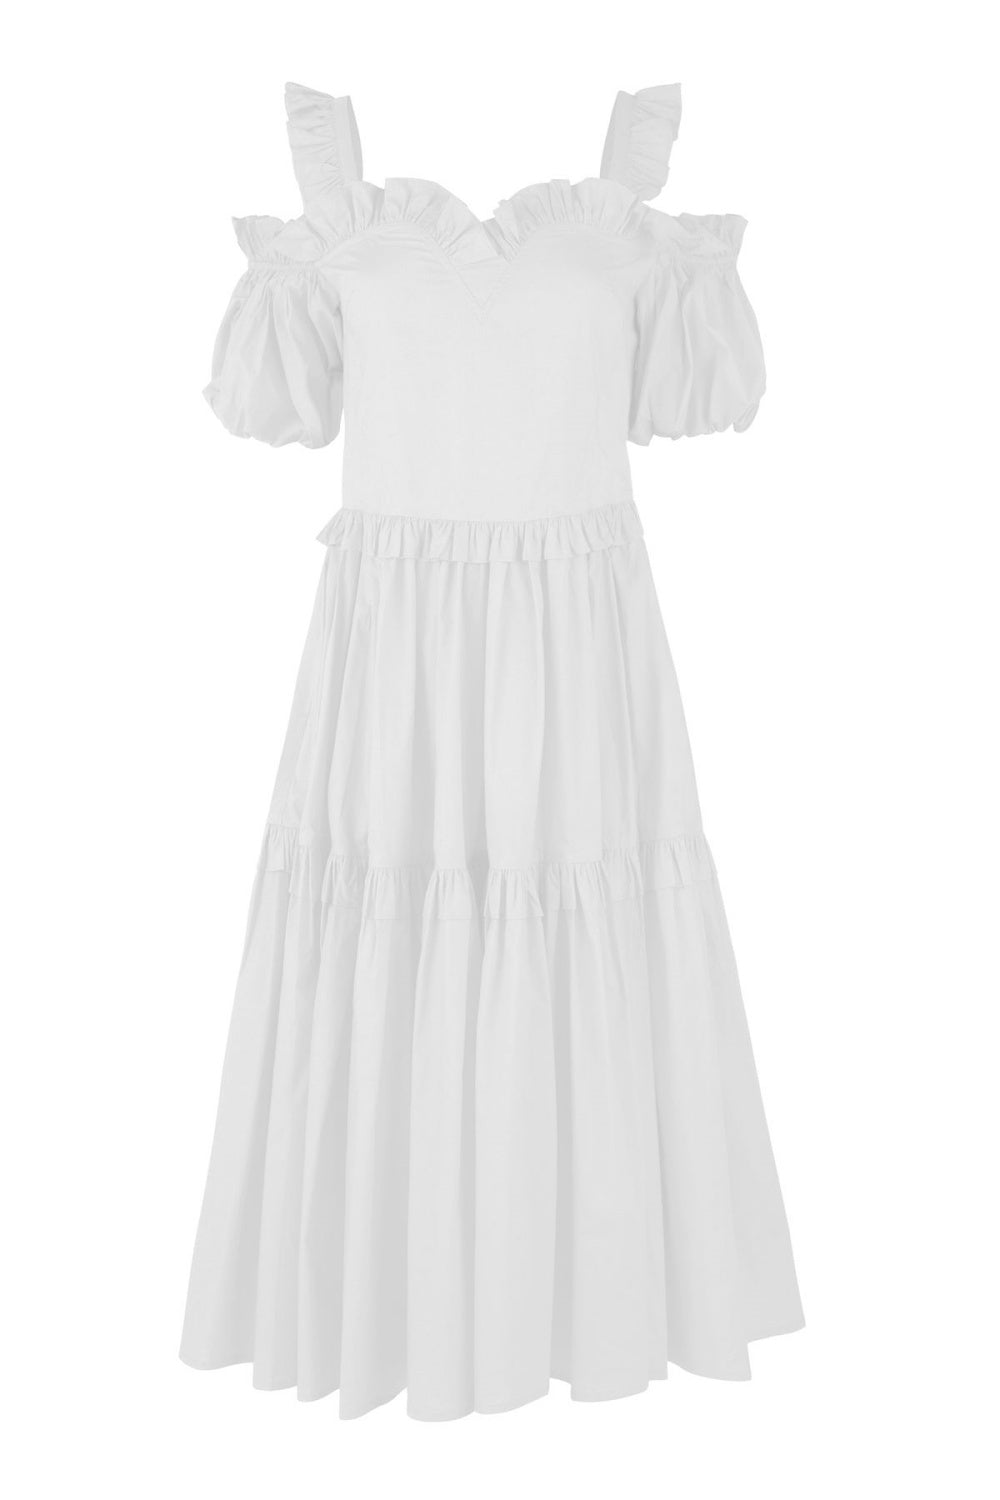 SWEETHEARTS FOREVER DRESS WHITE